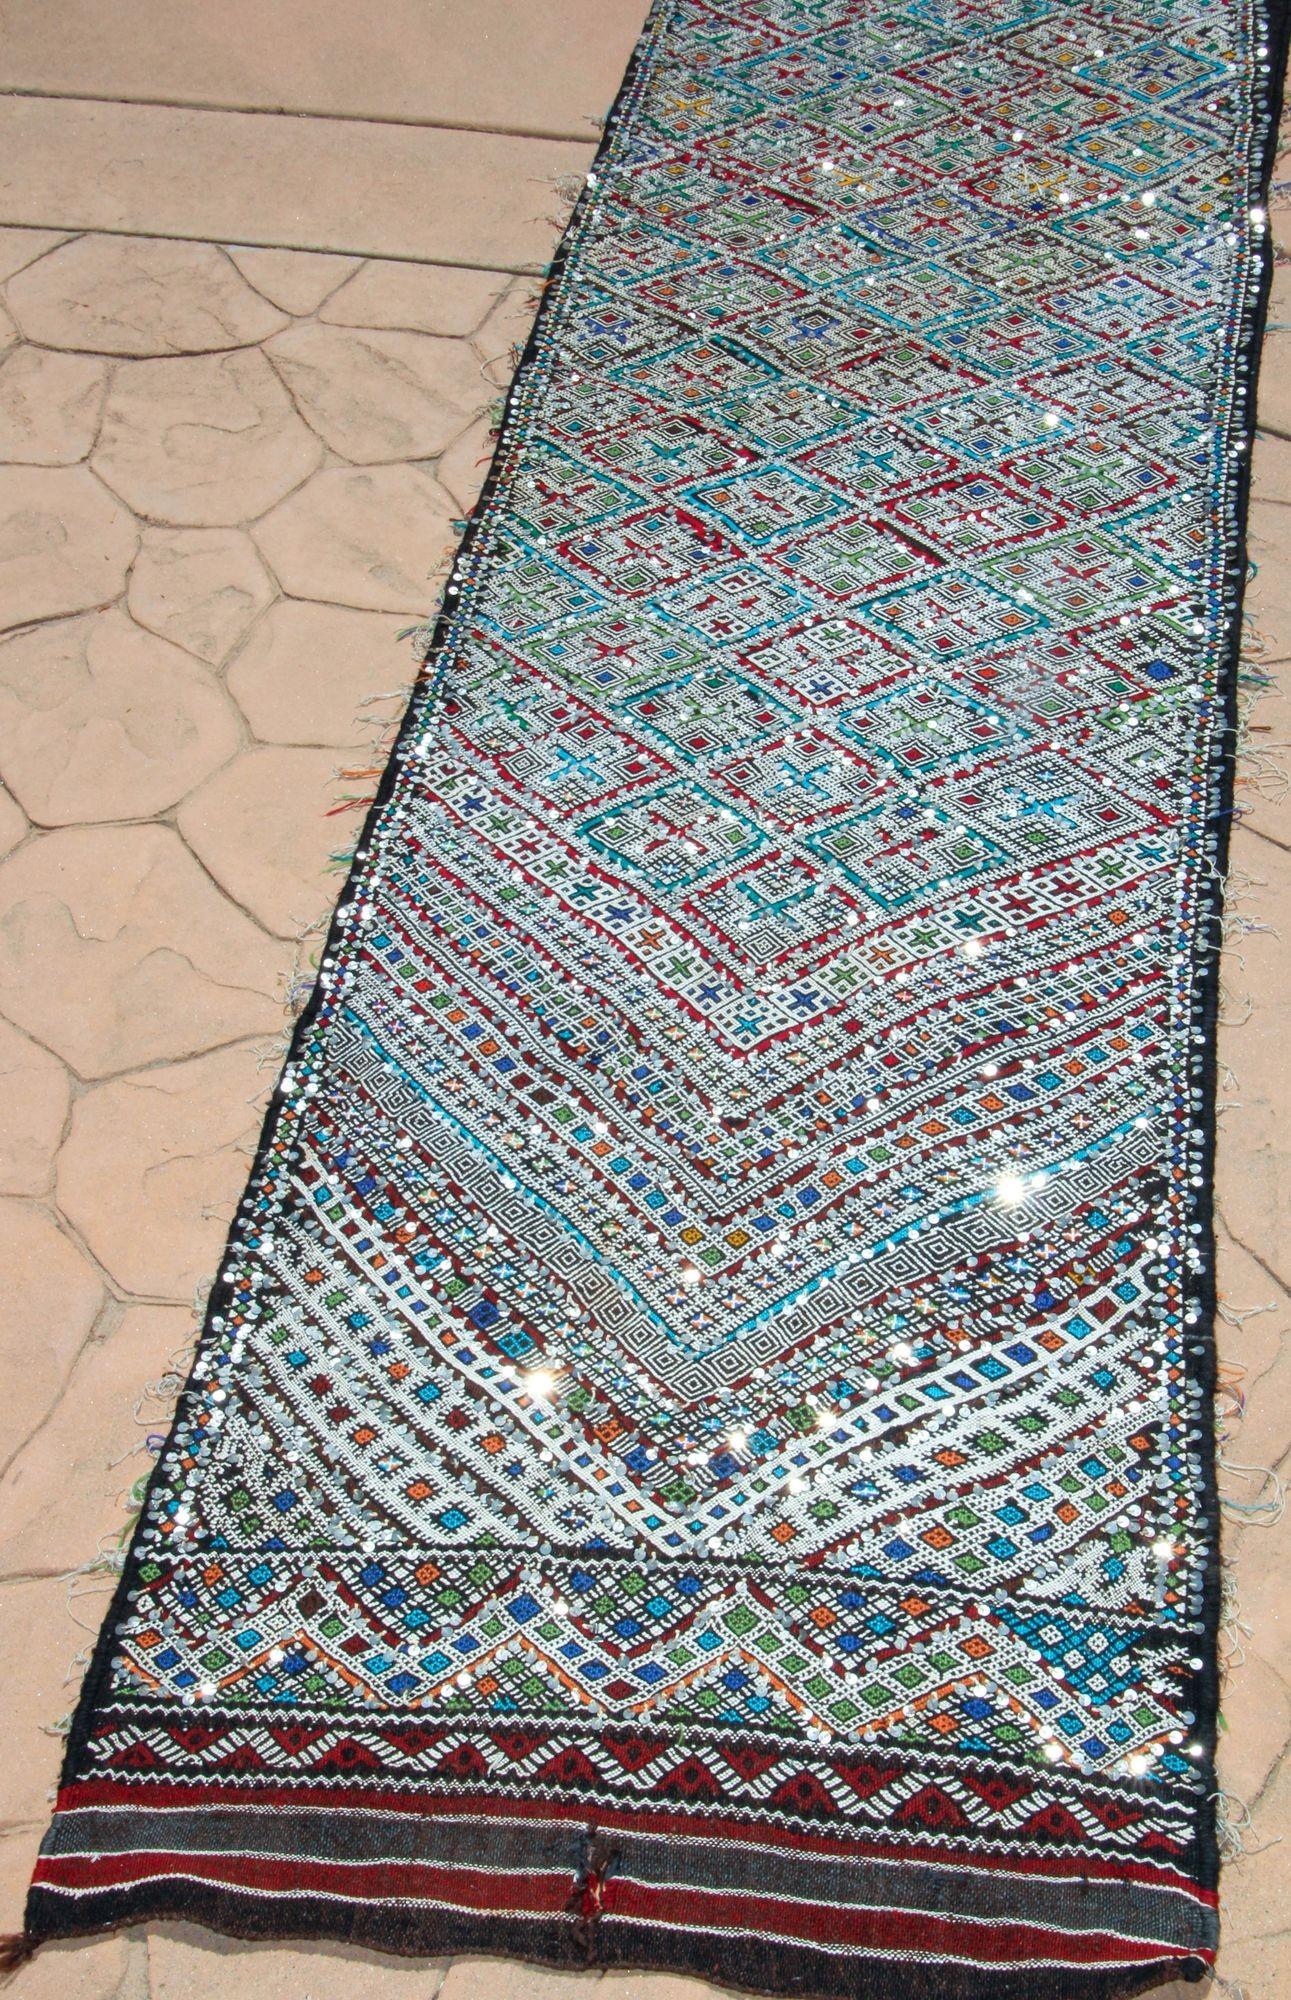 Hand-Crafted 1950s Vintage Zemmour Moroccan Rug Berber Runner, 3ft x 16.4ft long For Sale